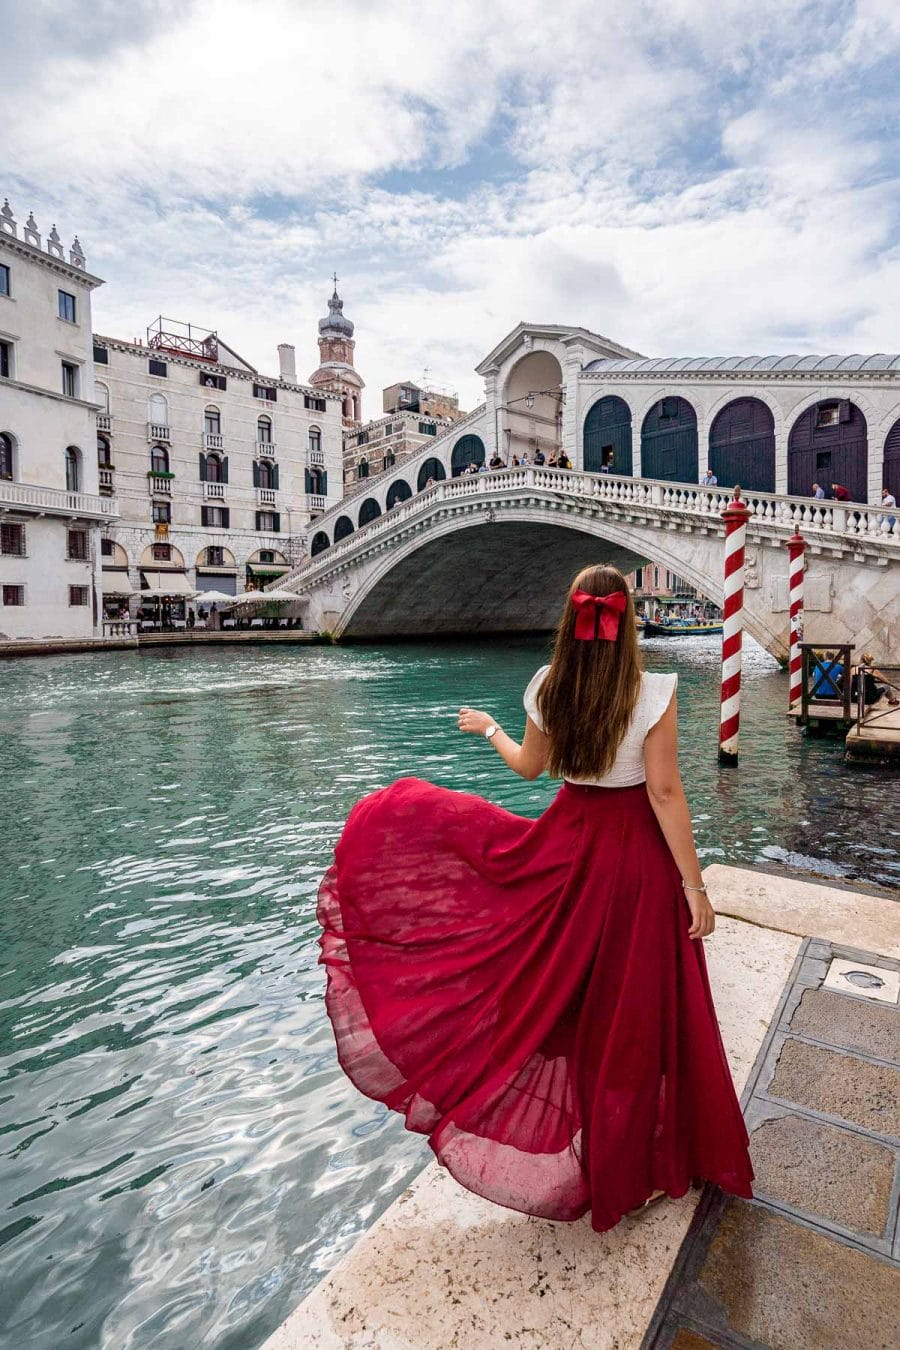 Girl in a red dress twirling in front of Rialto Bridge, which is one of the best Venice Instagram spots